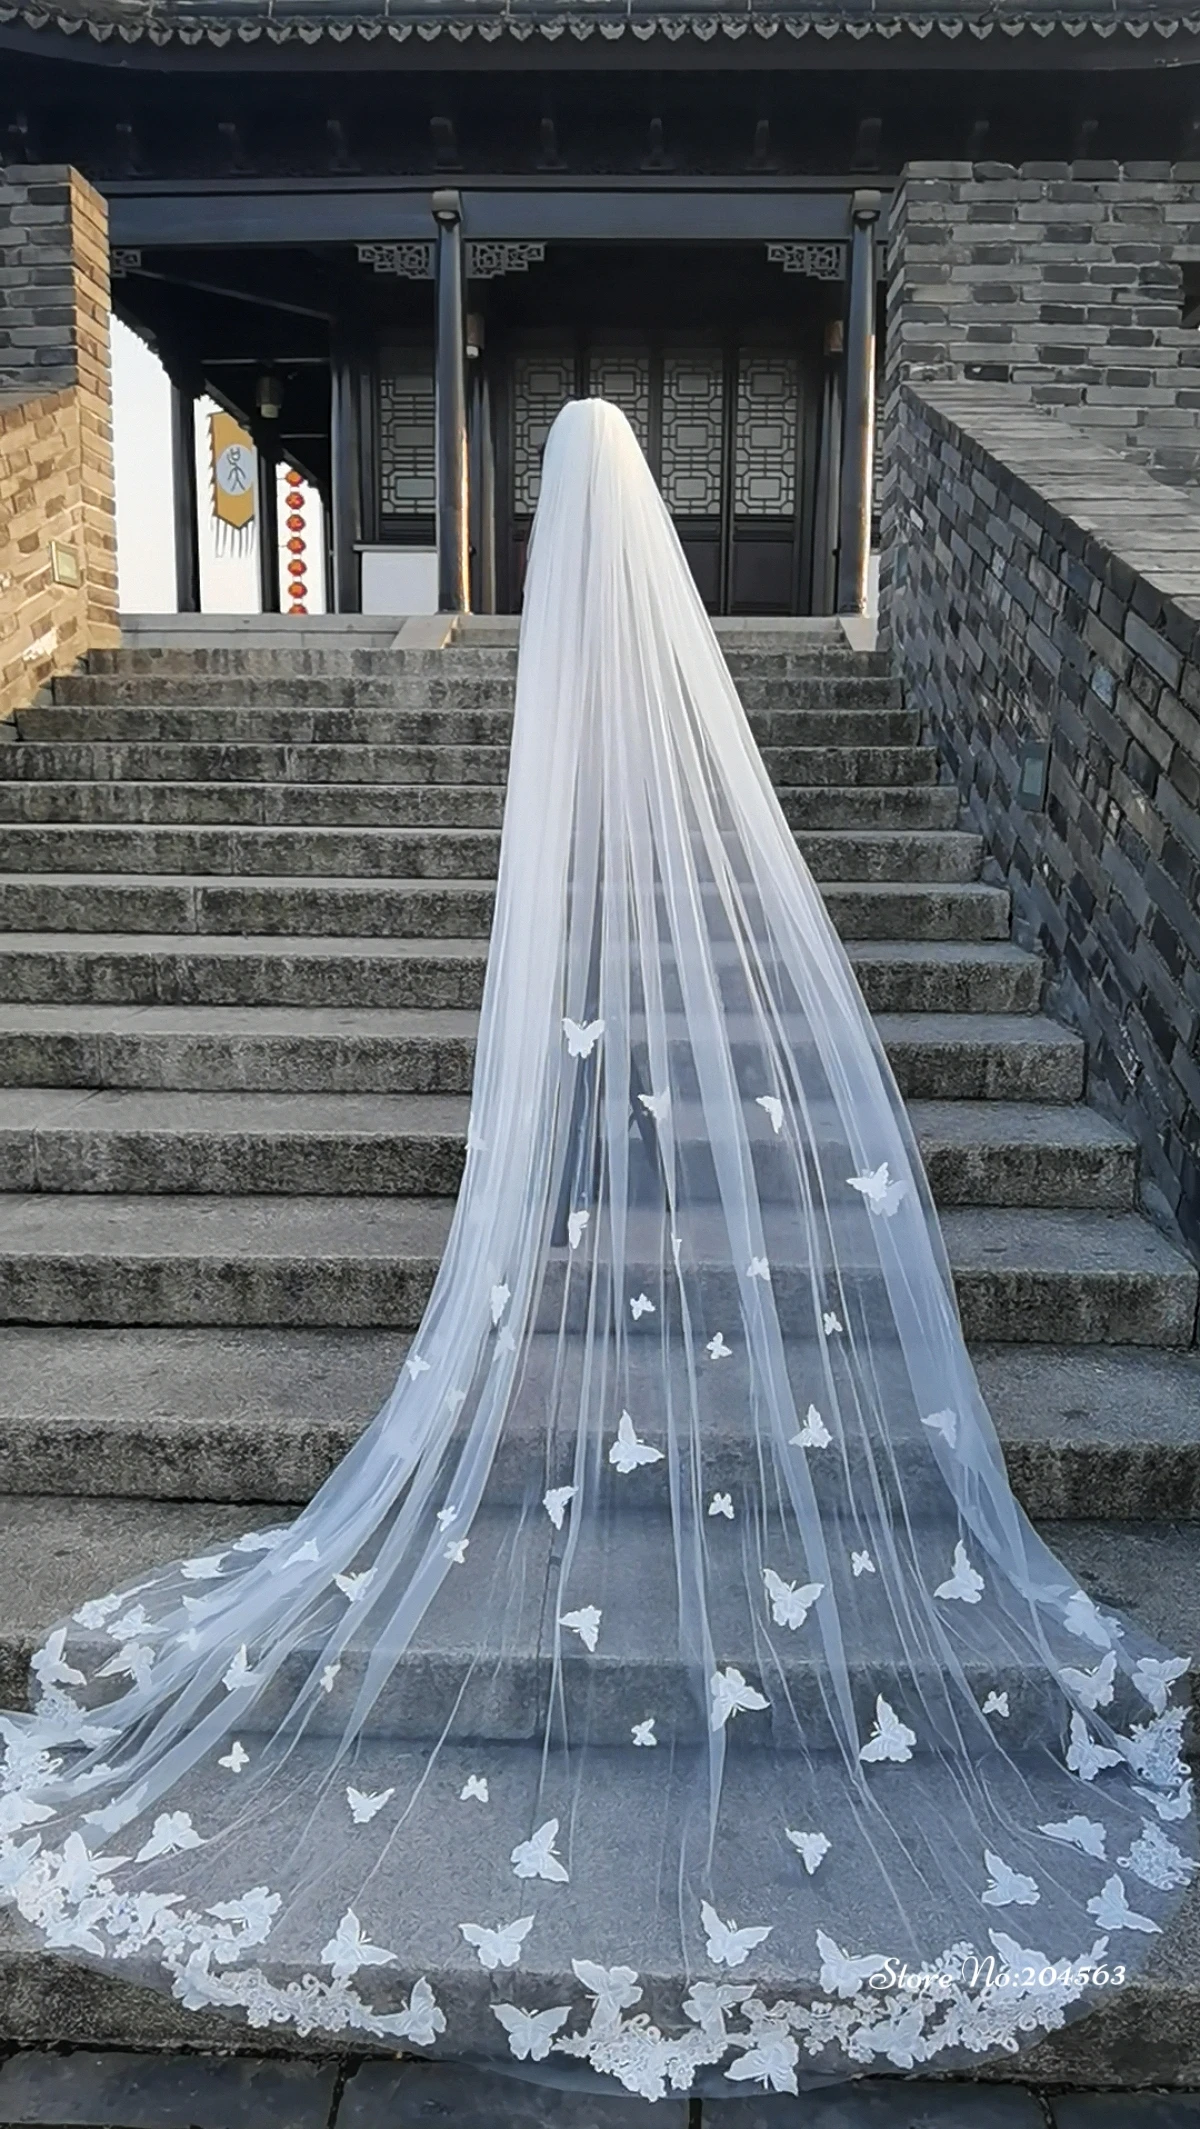 https://ae01.alicdn.com/kf/Hfb7952f539094282a982f0c8ef4d92ccM/One-Layer-3D-Butterflies-Wedding-Veil-Lace-Veil-Cathedral-Bridal-Veil-With-Steel-Comb-Wedding-Accessories.jpg